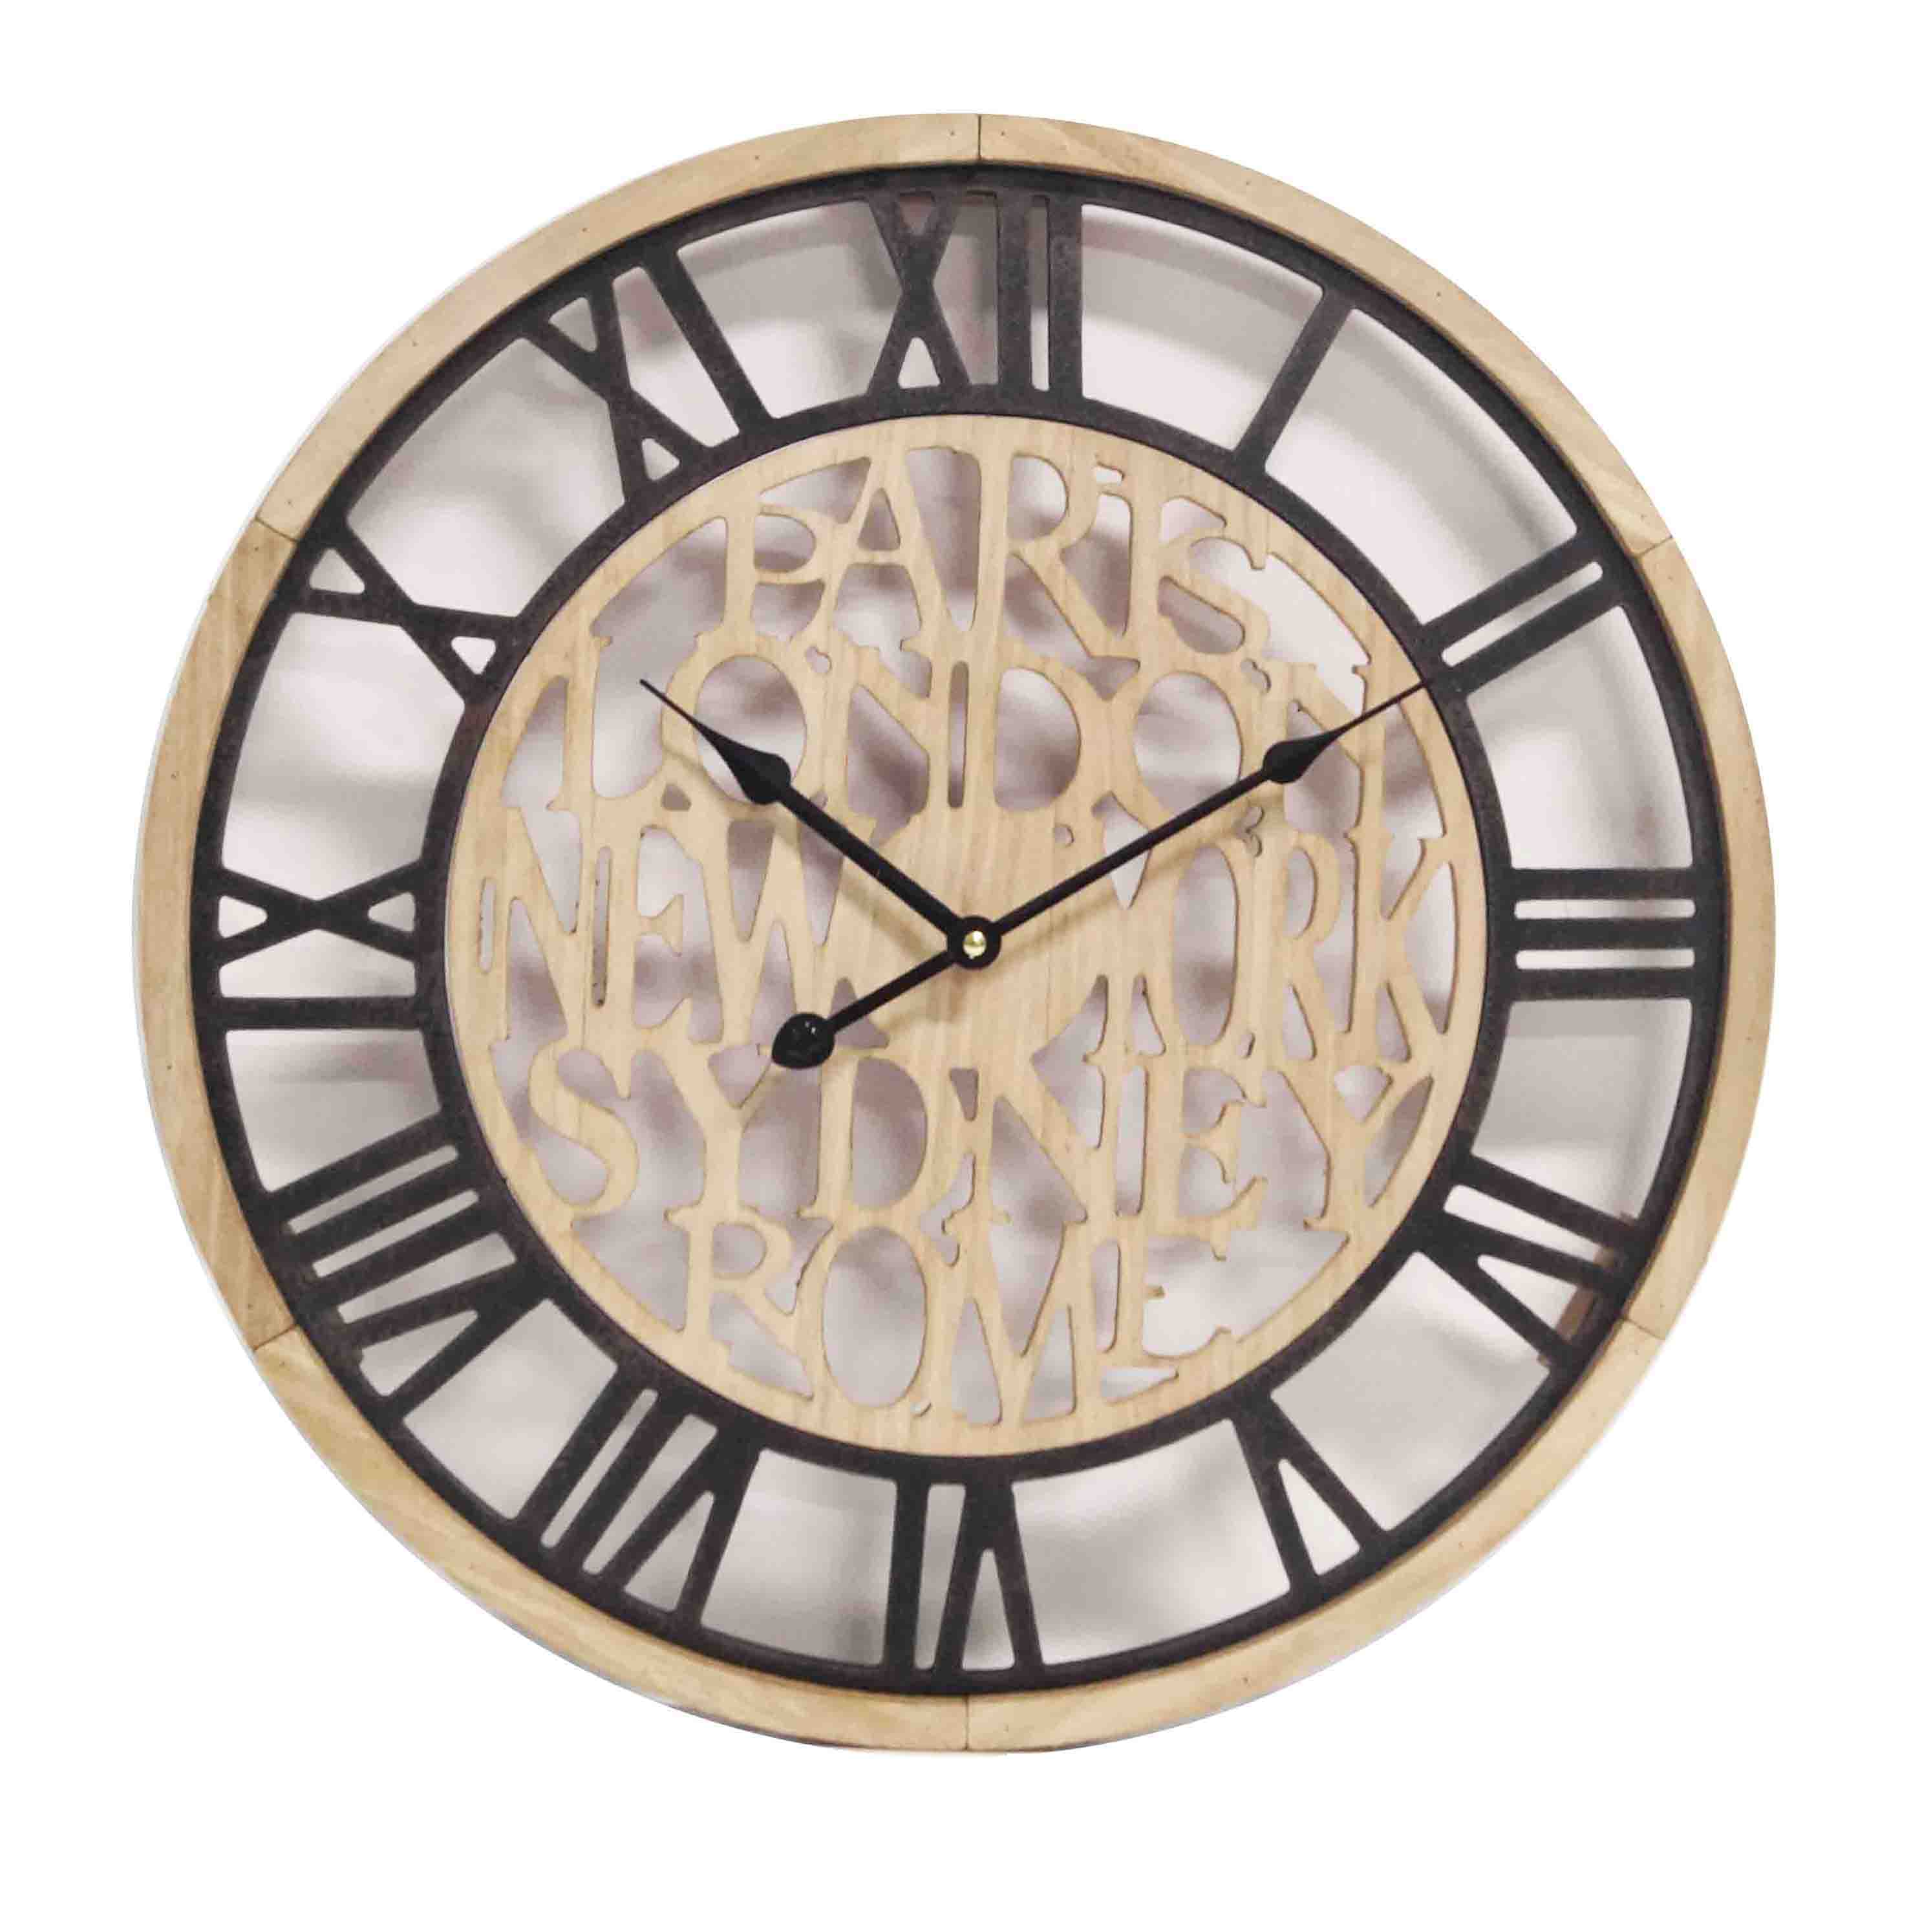 Wooden Decorative Carved Effect Wall Clock Quality Wall Clocks